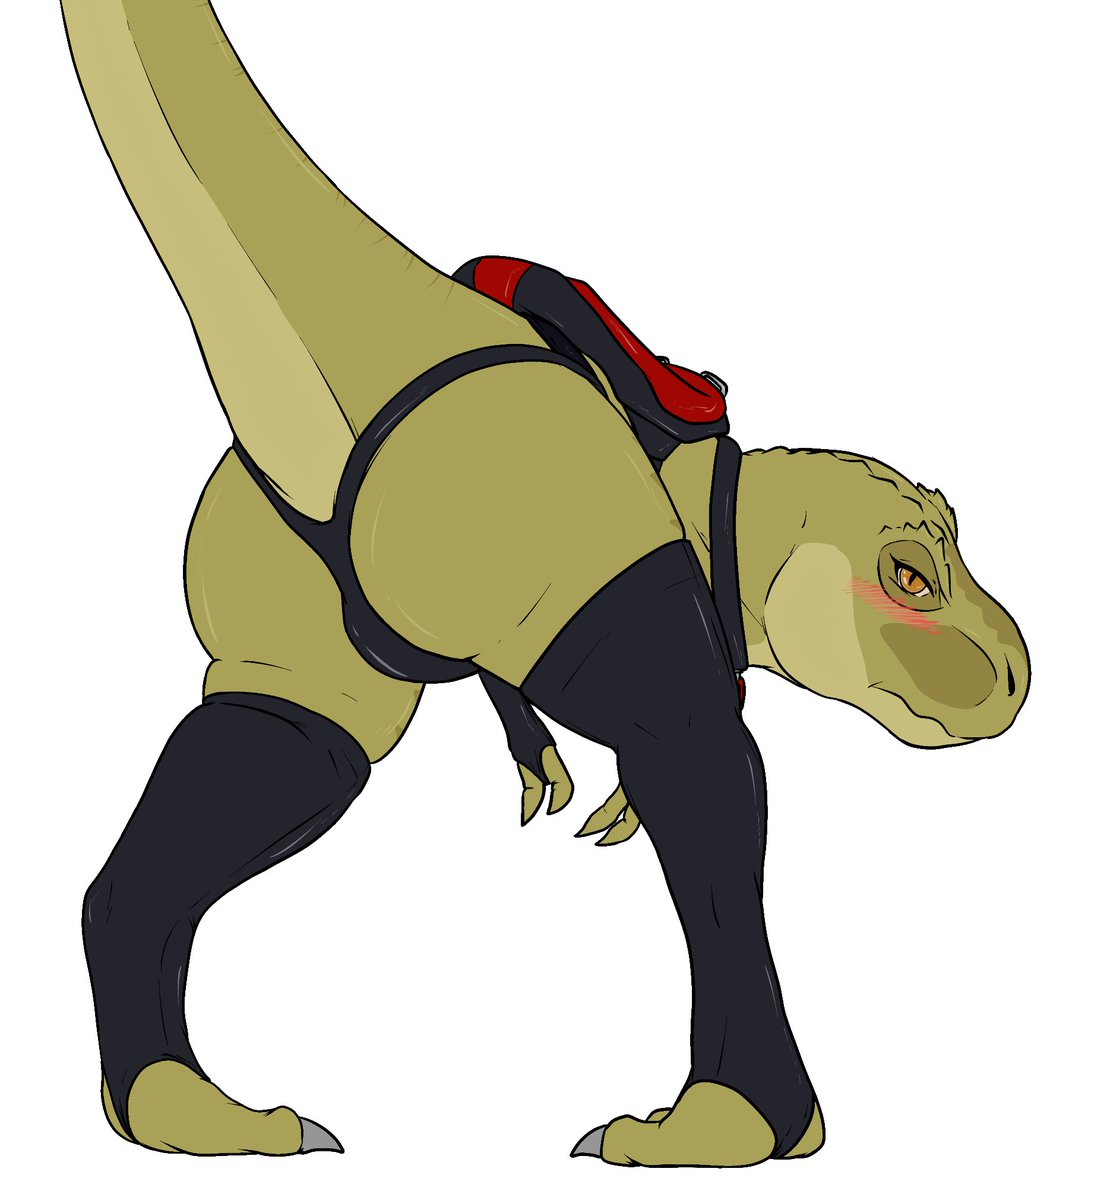 Since I found that old ARK Raptor drawing it made me want to go find the T-Rex...